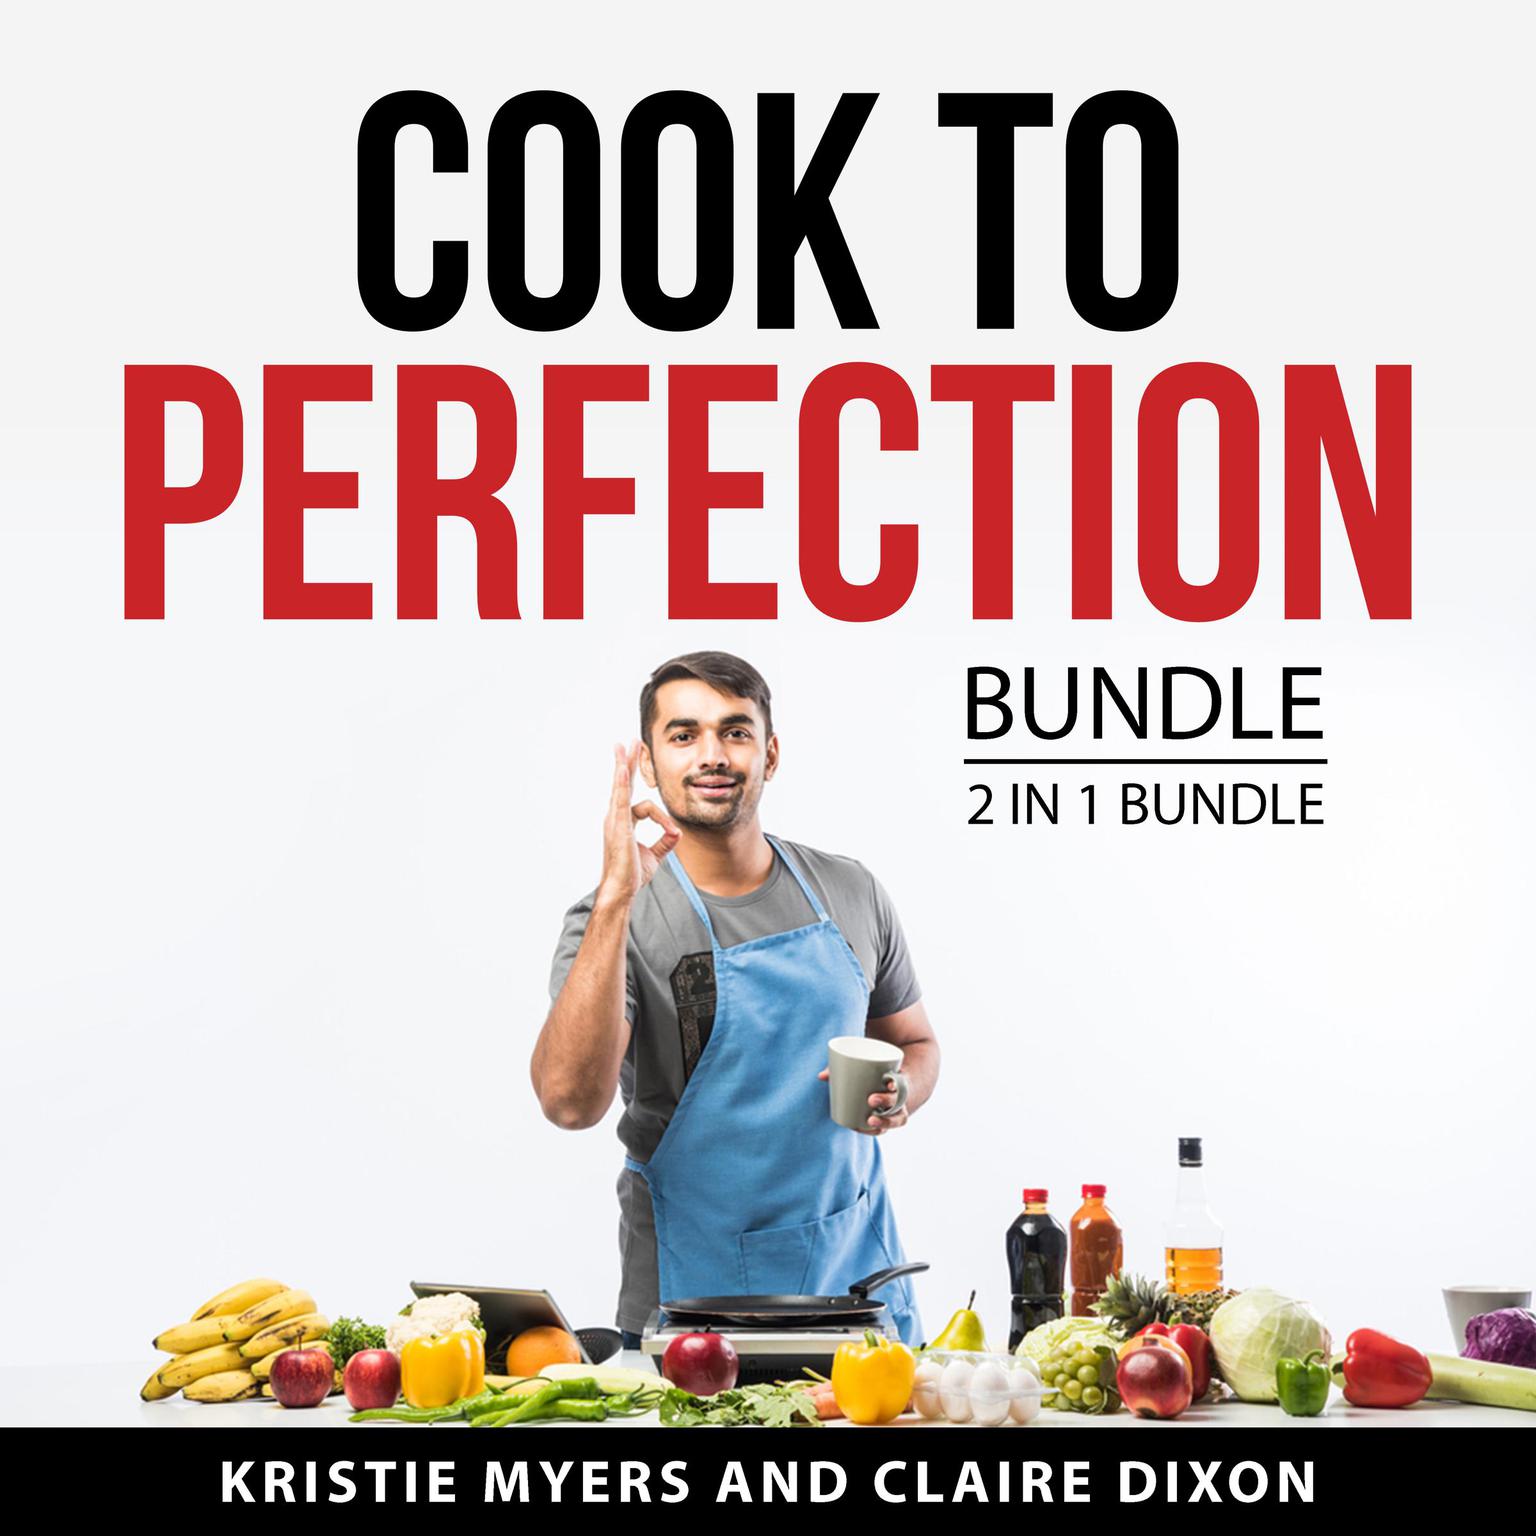 Cook to Perfection Bundle, 2 in 1 Bundle Audiobook, by Claire Dixon